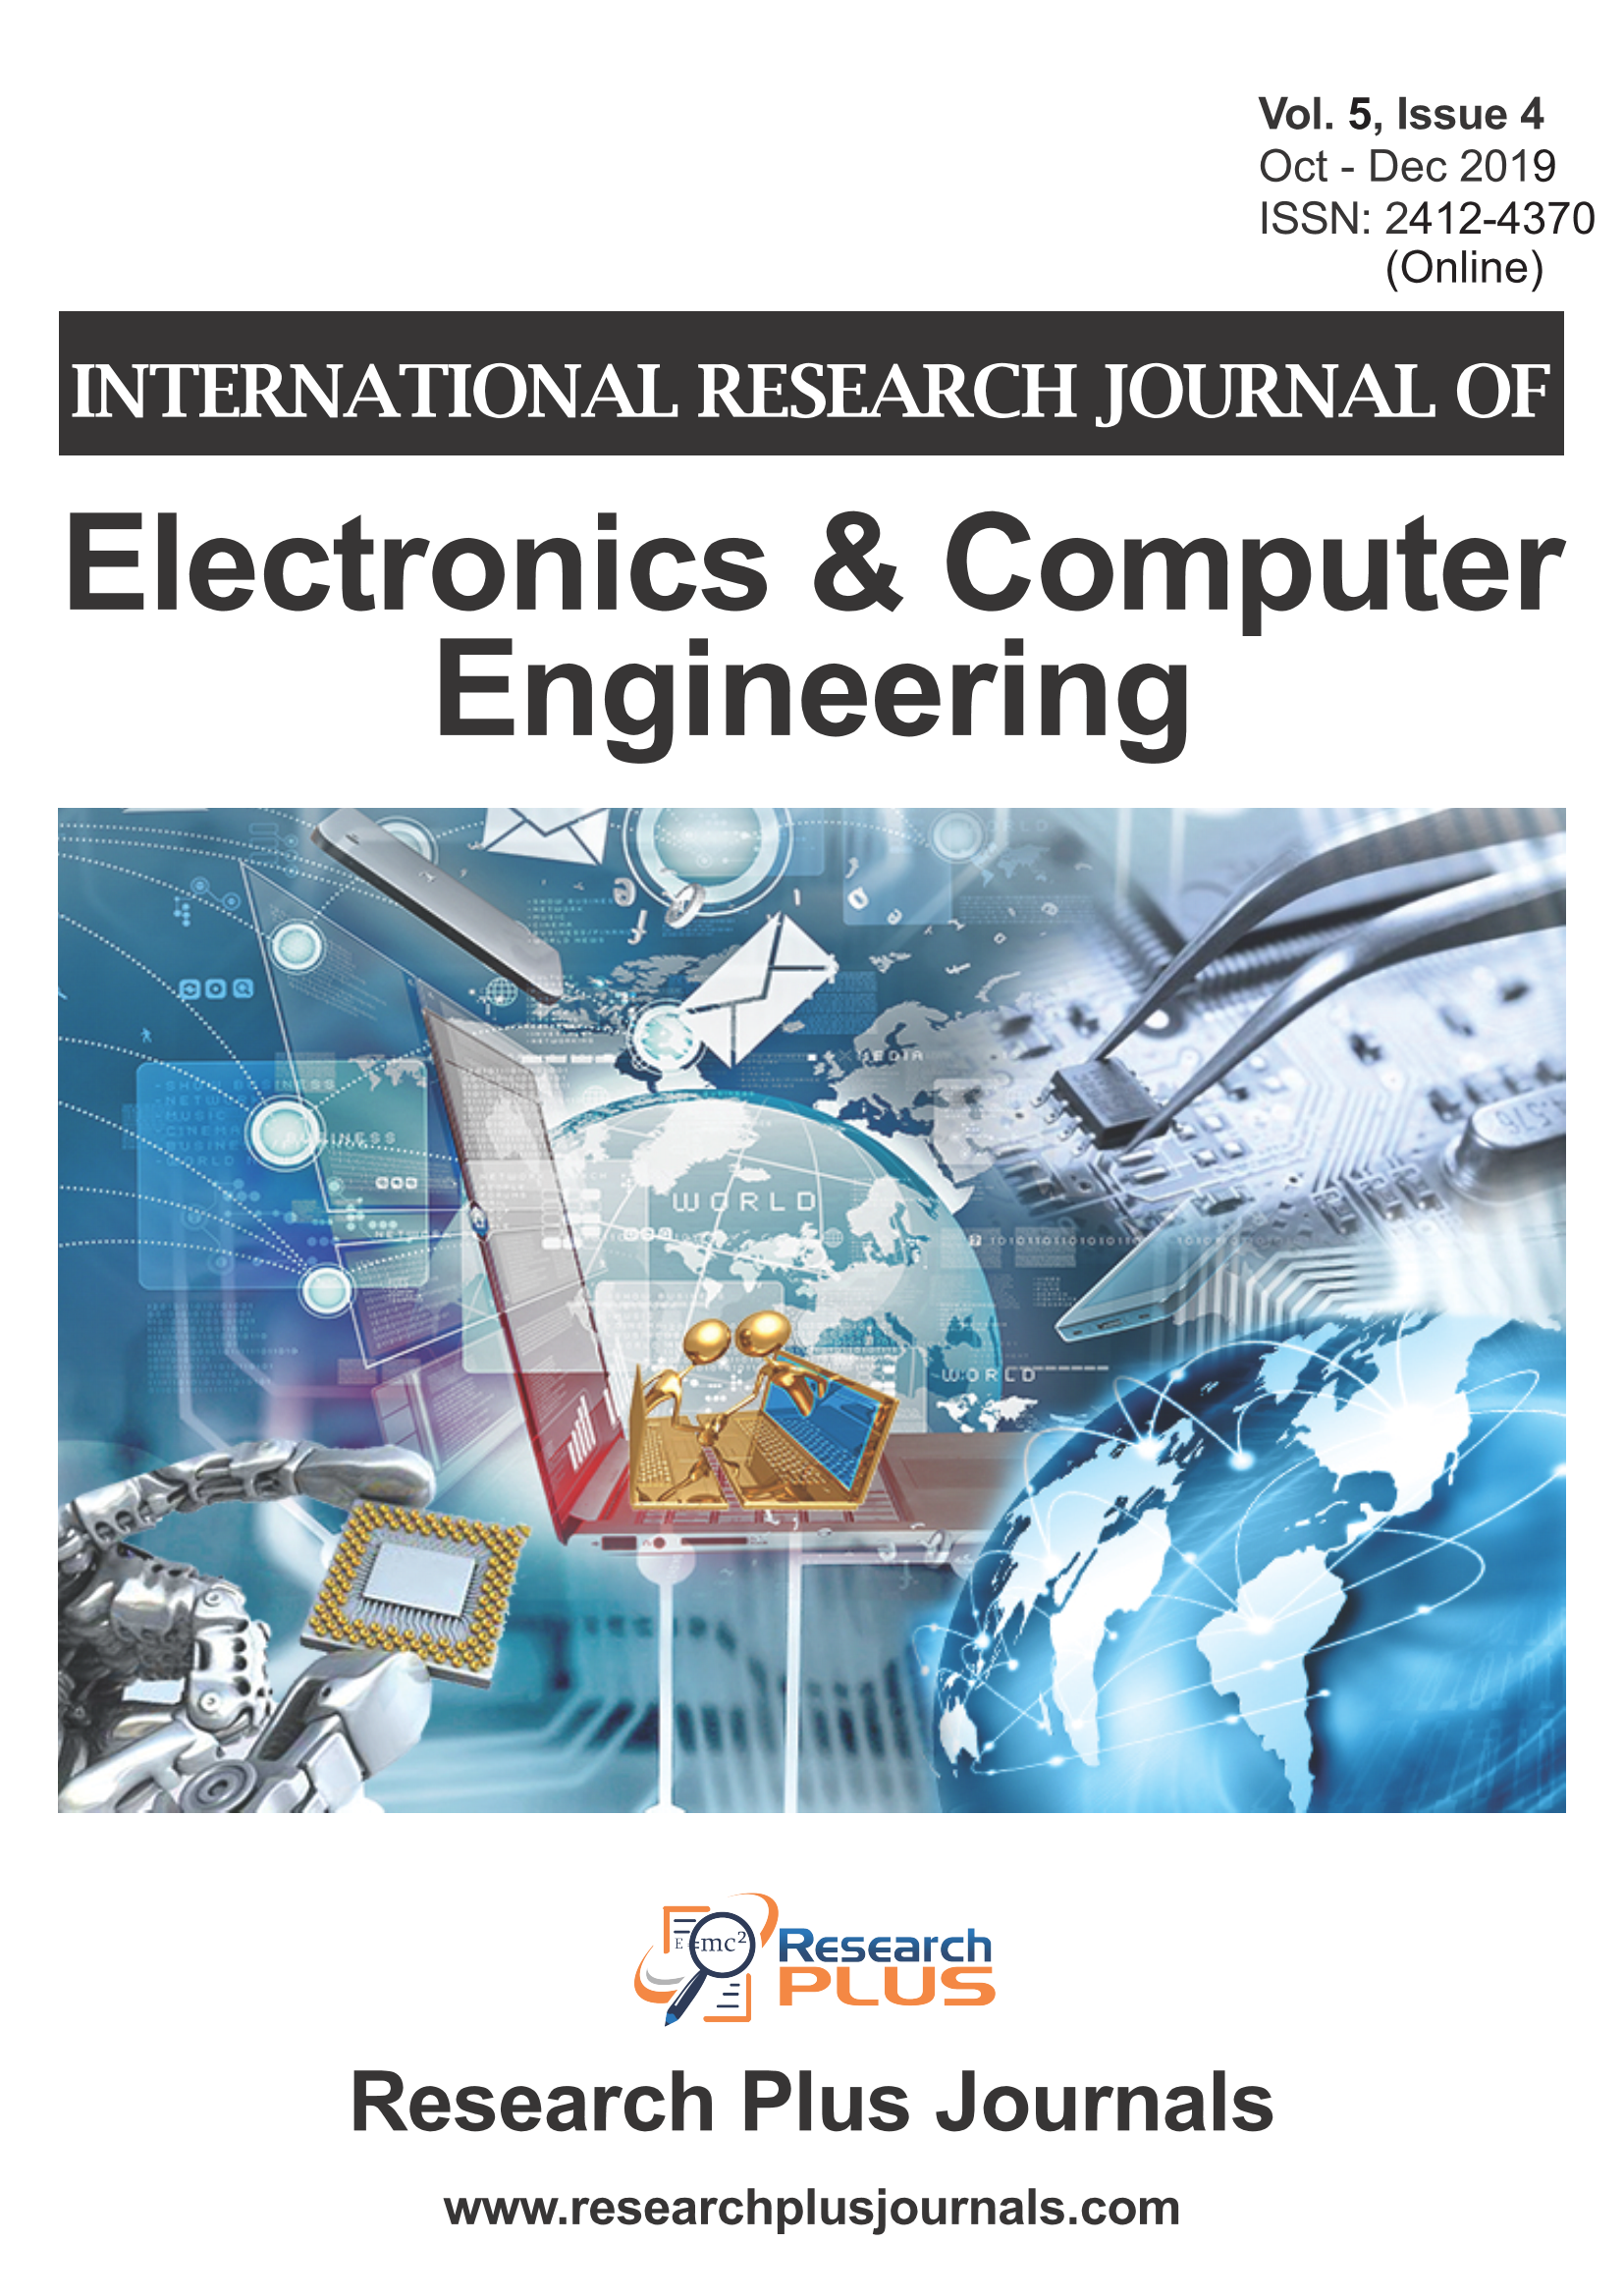 Volume 5, Issue 4, International Research Journal of Electronics & Computer Engineering (IRJECE) (Online ISSN : 2412-4370)